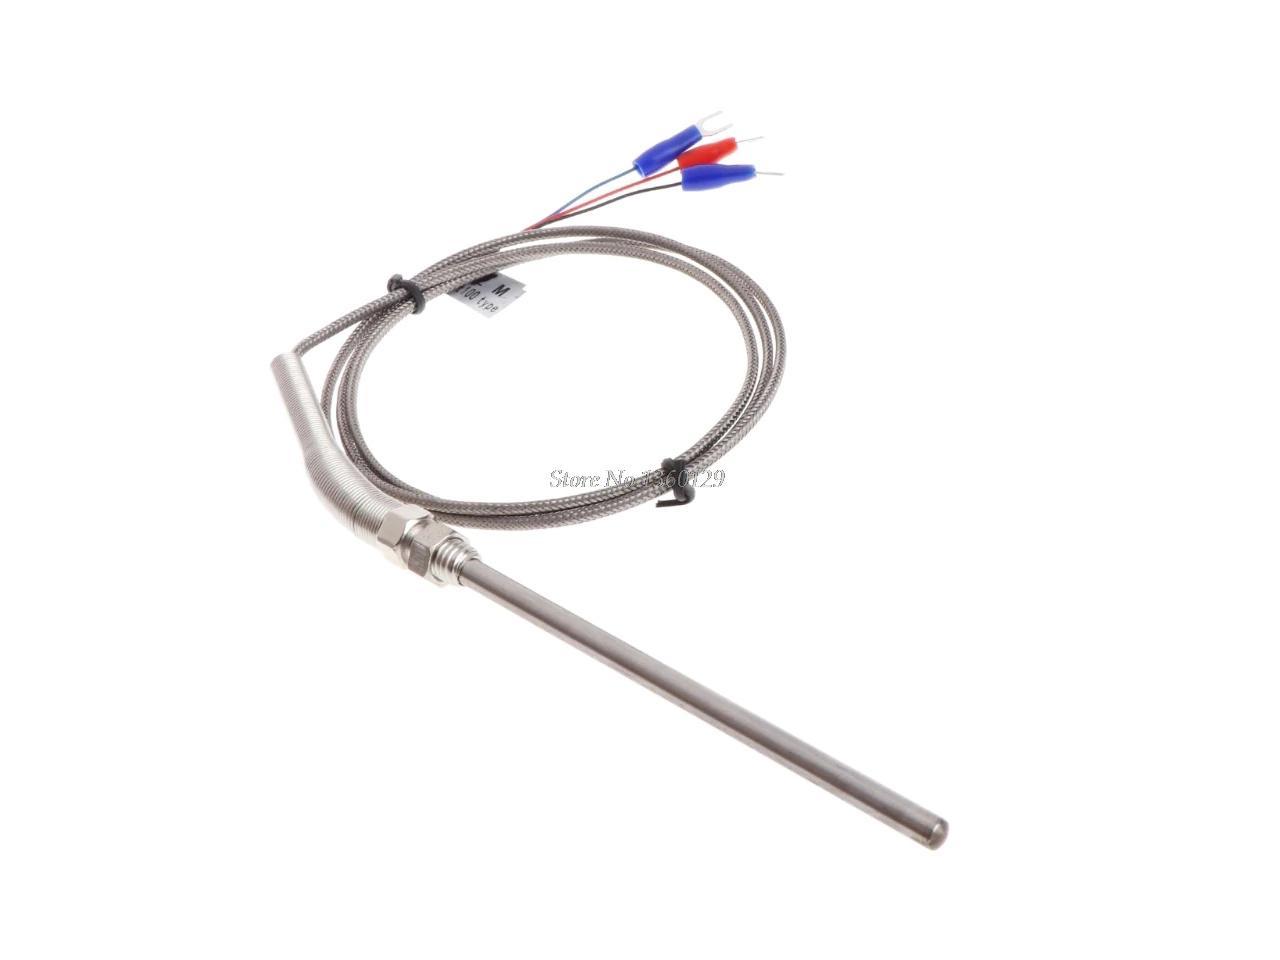 Details about   PT100 Probe Thermocouple Temperature Sensor Cable with 10M Wire